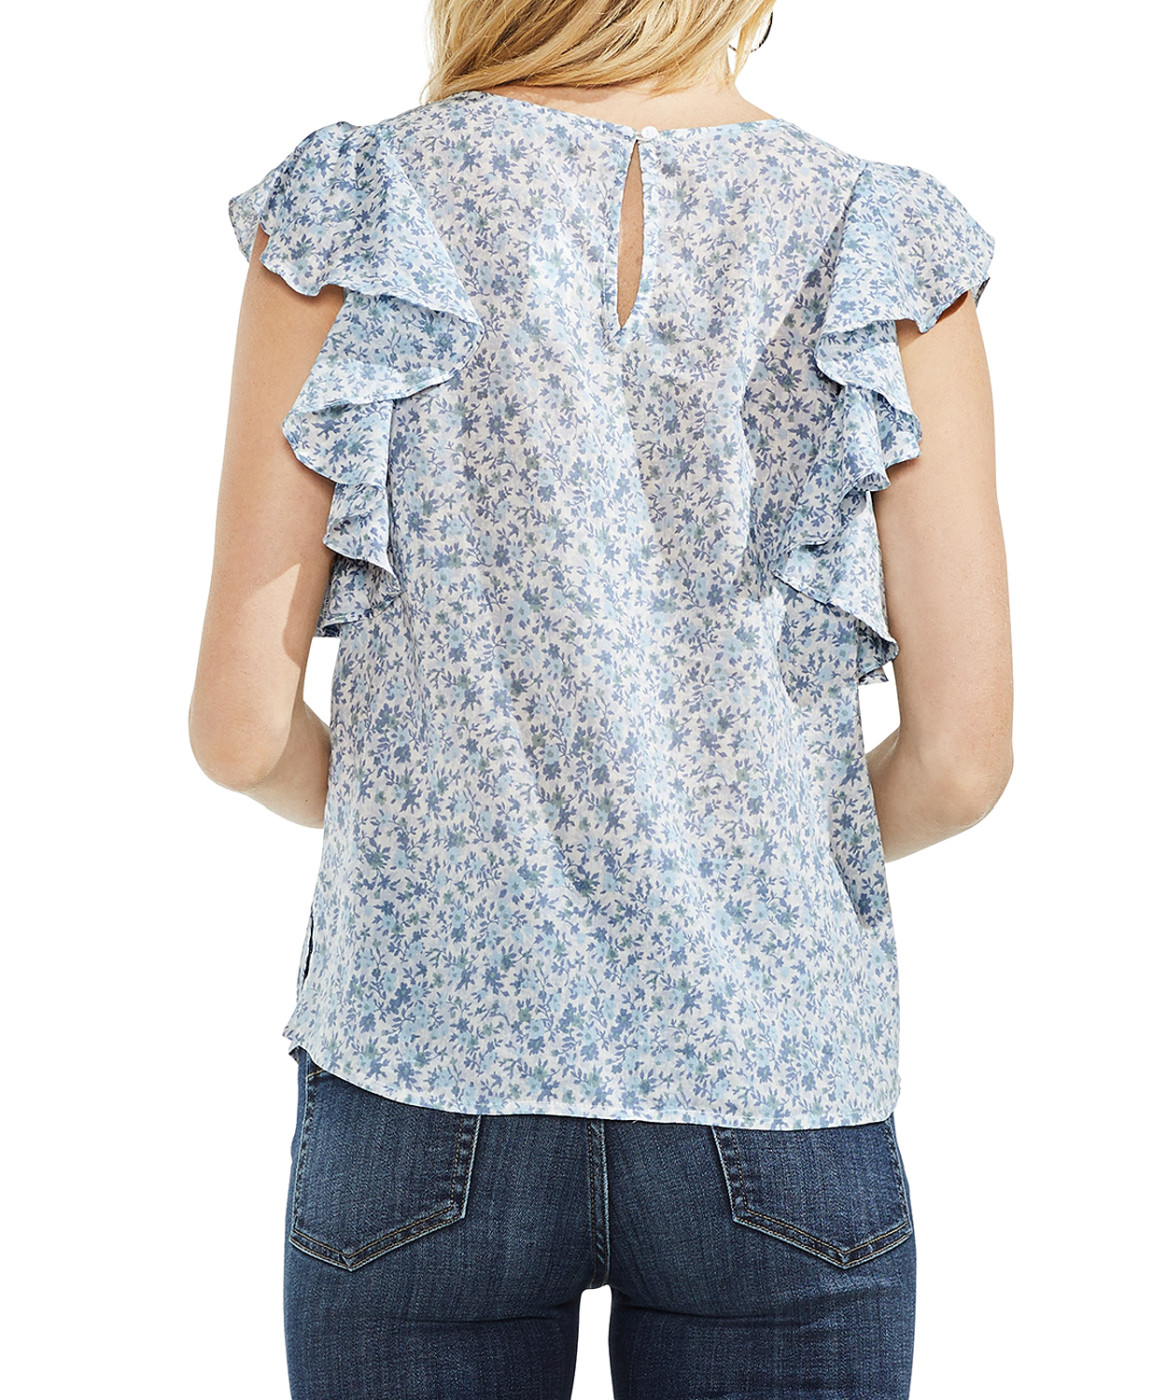 woocommerce-673321-2209615.cloudwaysapps.com-vince-camuto-womens-whisper-ditsy-ruffle-sleeve-top